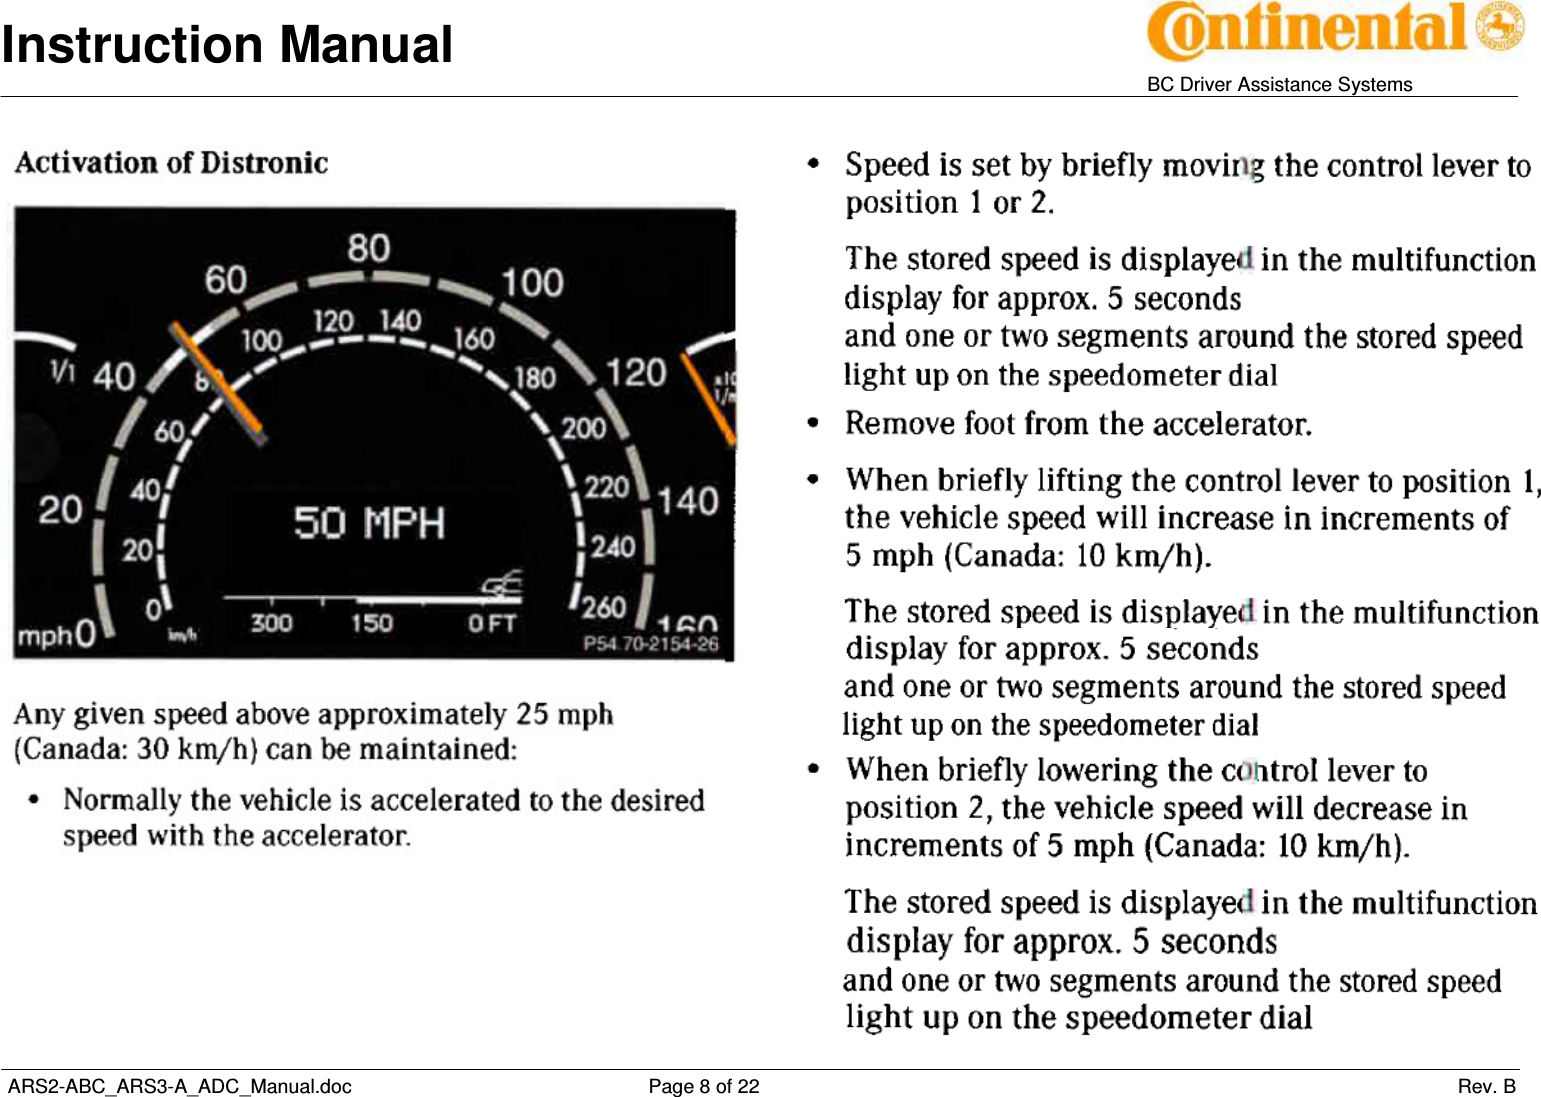 Instruction Manual   BC Driver Assistance Systems  ARS2-ABC_ARS3-A_ADC_Manual.doc     Page 8 of 22                 Rev. B              